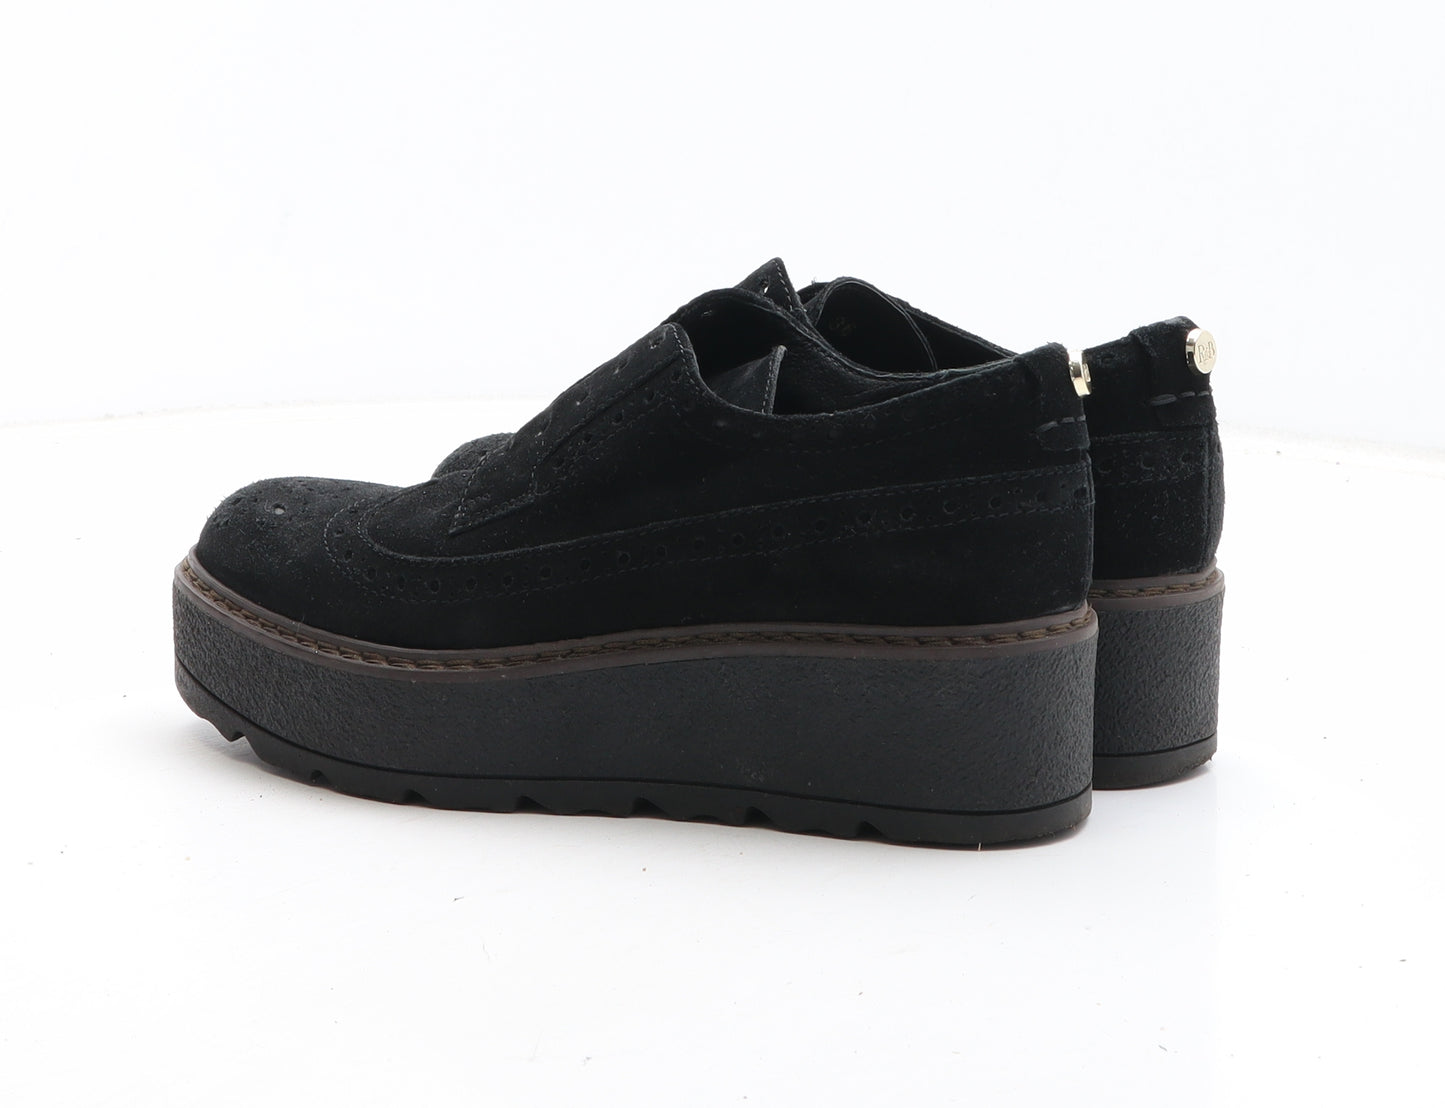 Russell & Bromley Womens Black Synthetic Slip On Casual UK - UK Estimated Size 3